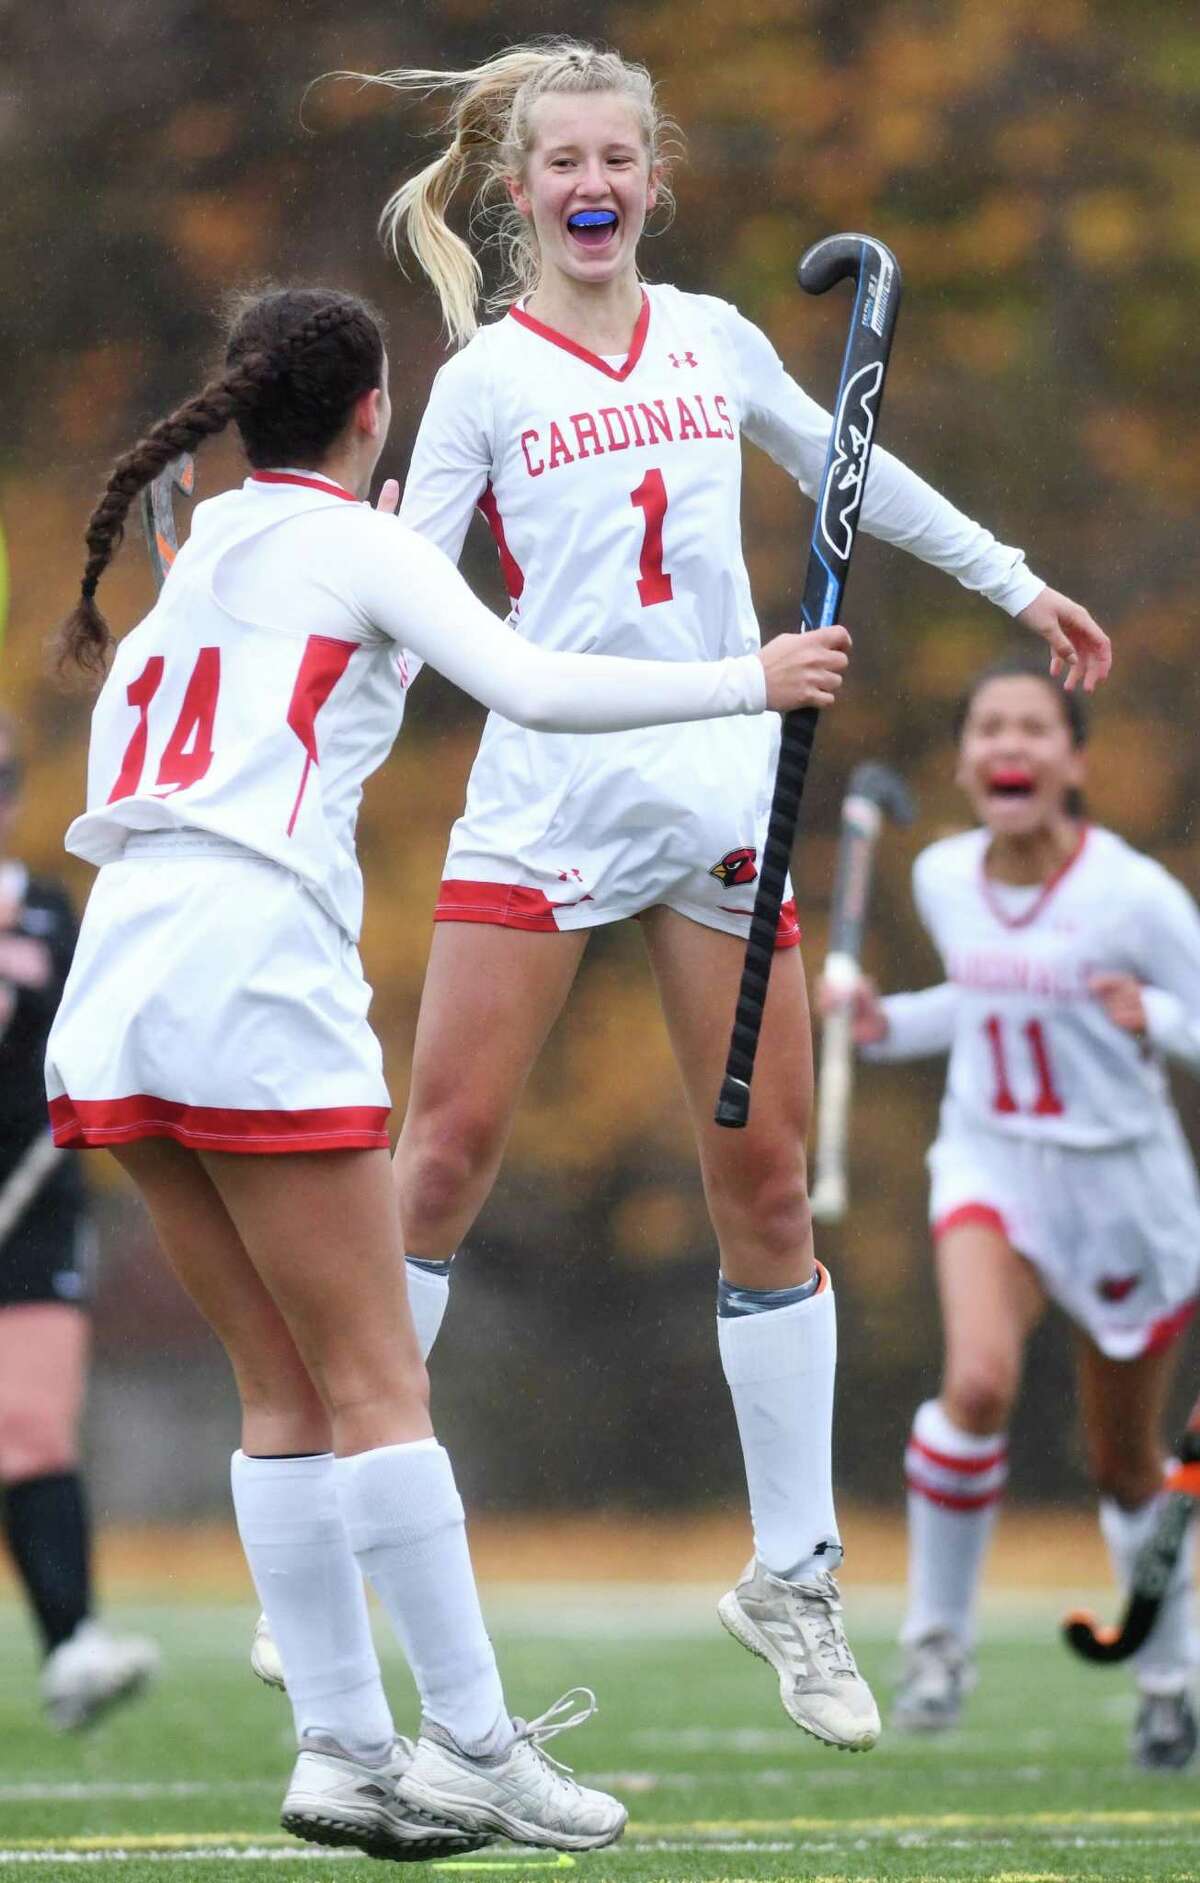 Greenwich's Zita Cohen (1) celebrates after scoring the first goal in Greenwich's 6-0 win over Stamford in the FCIAC West championship game at Greenwich High School in Greenwich, Conn. Thursday, Nov. 12, 2020.